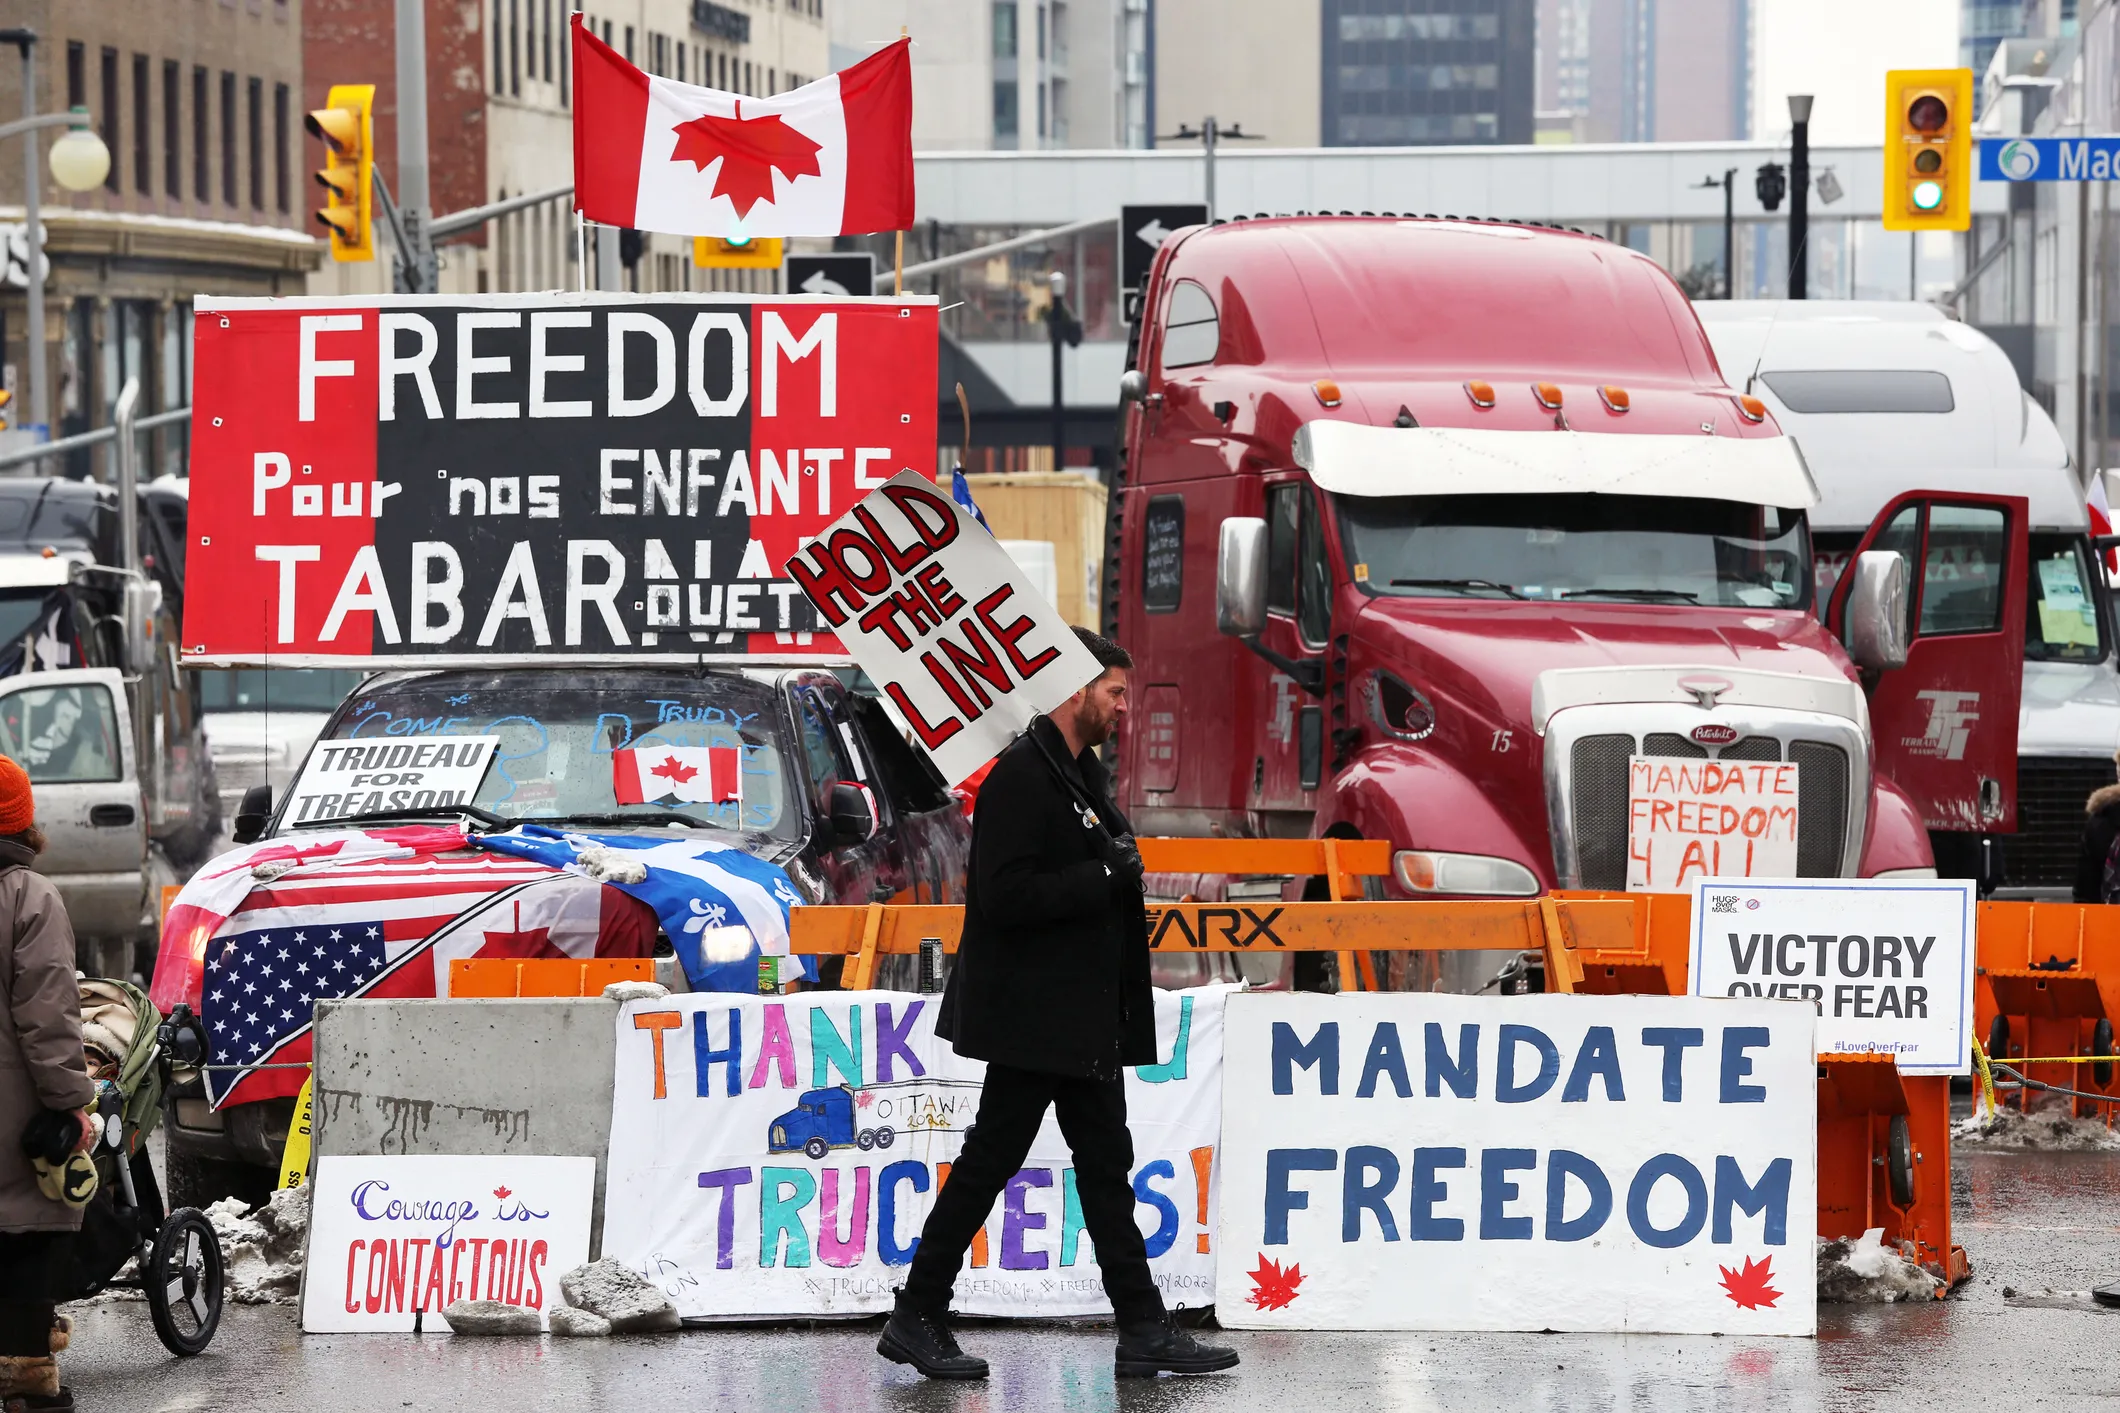 $290 million lawsuit against Freedom Convoy participants designed to silence expression